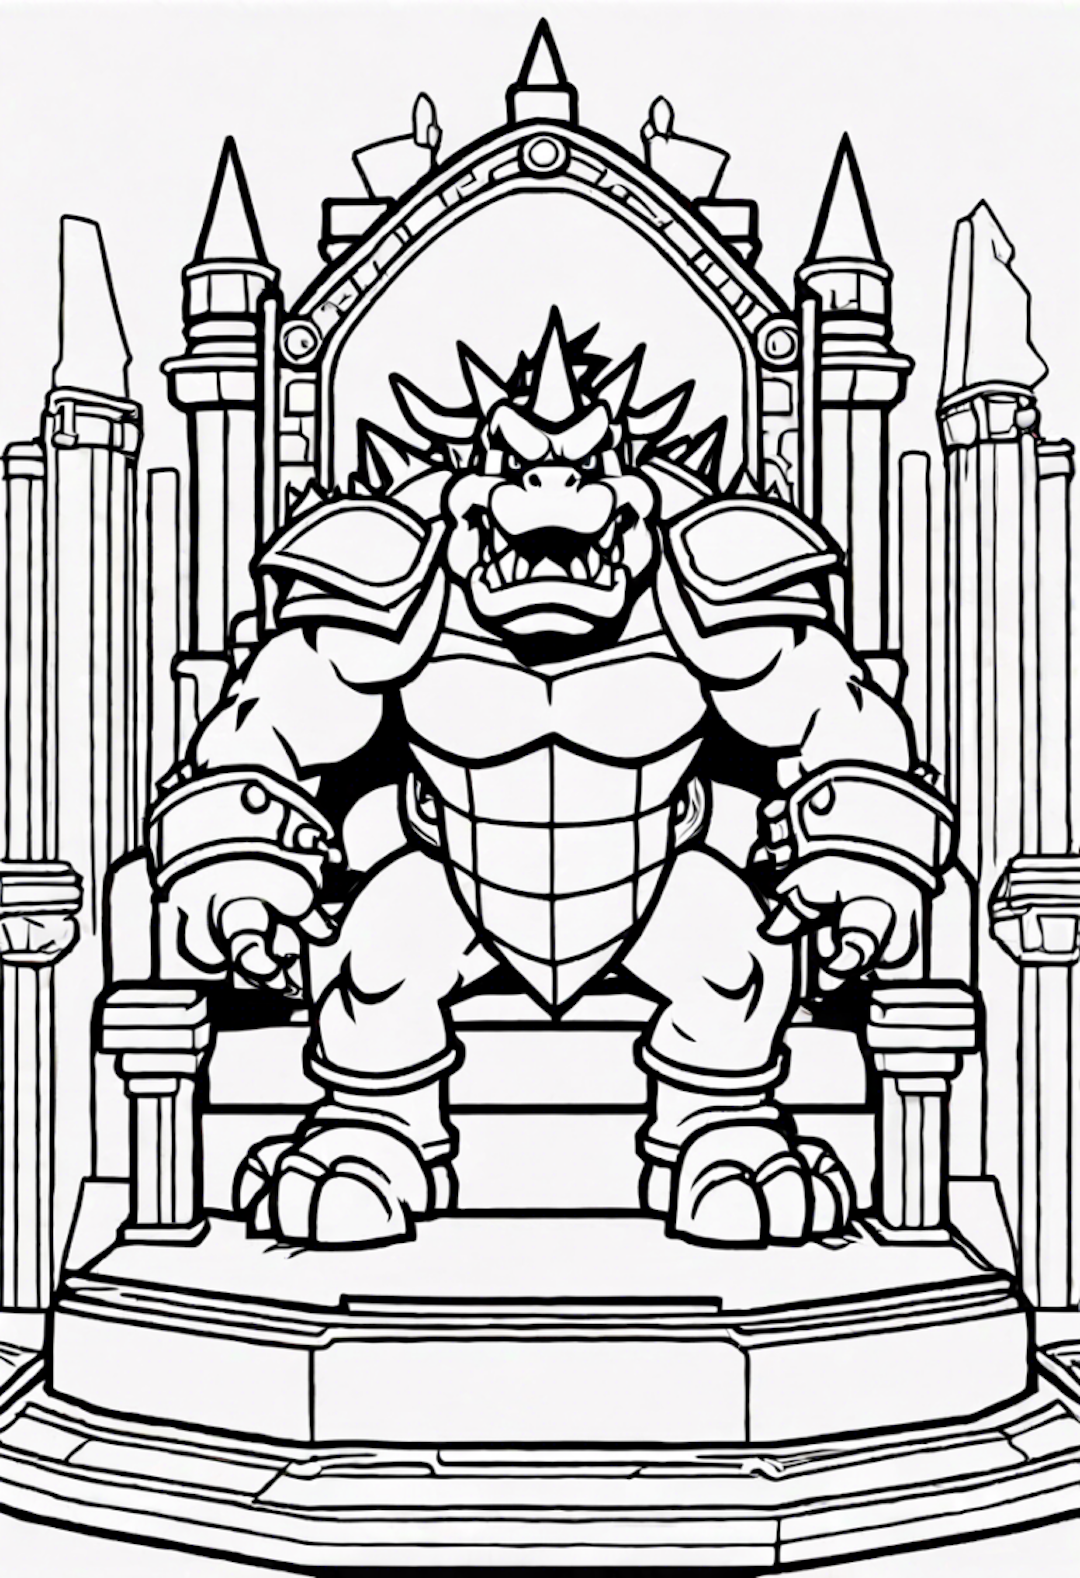 Bowser on His Throne Coloring Page coloring pages